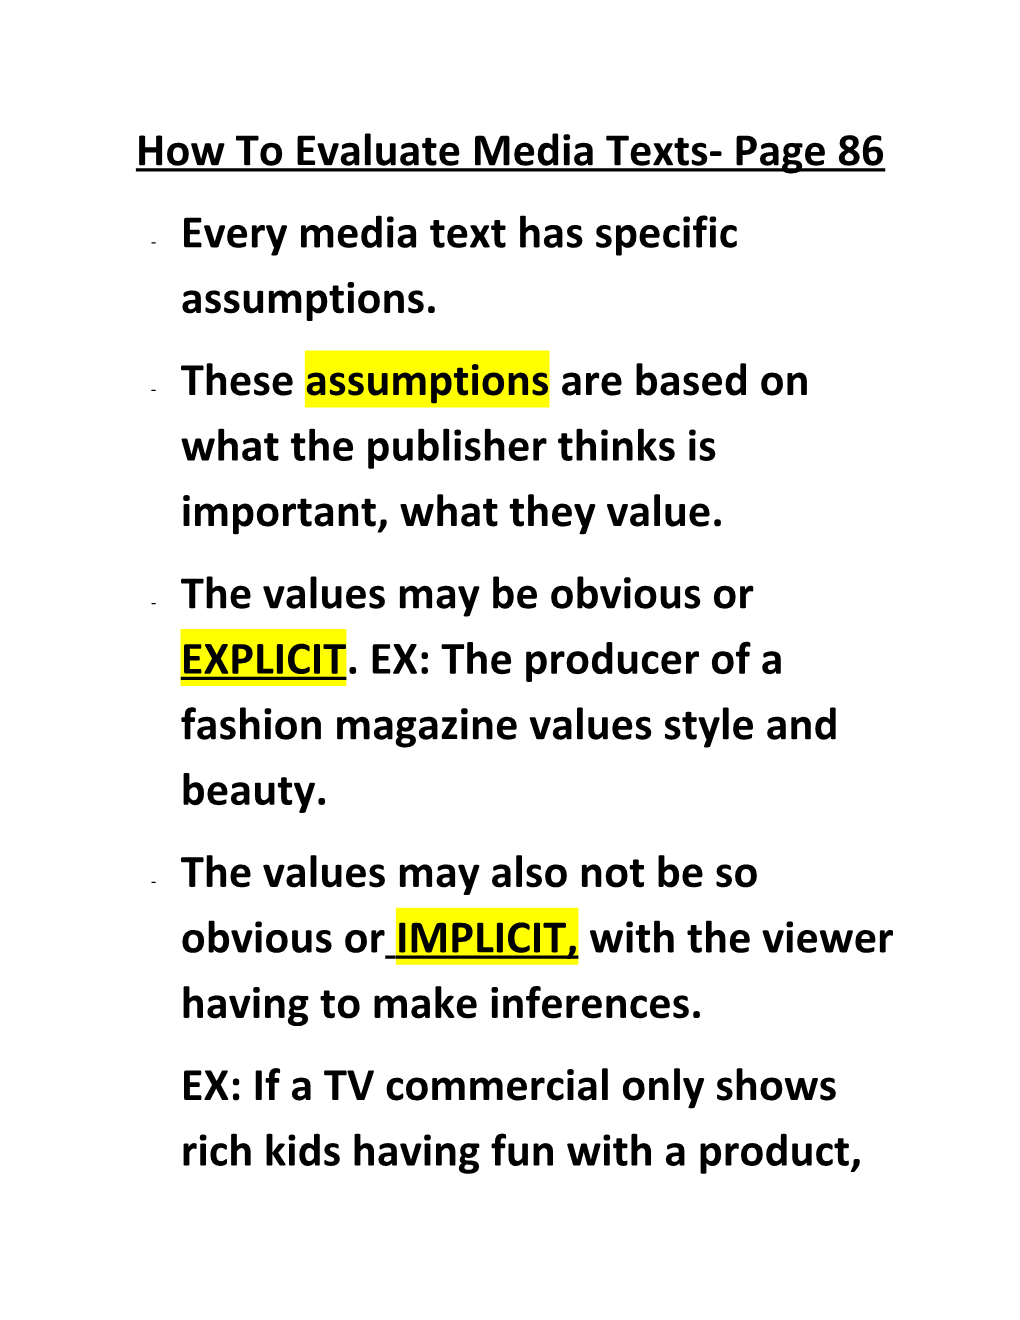 How to Evaluate Media Texts- Page 86